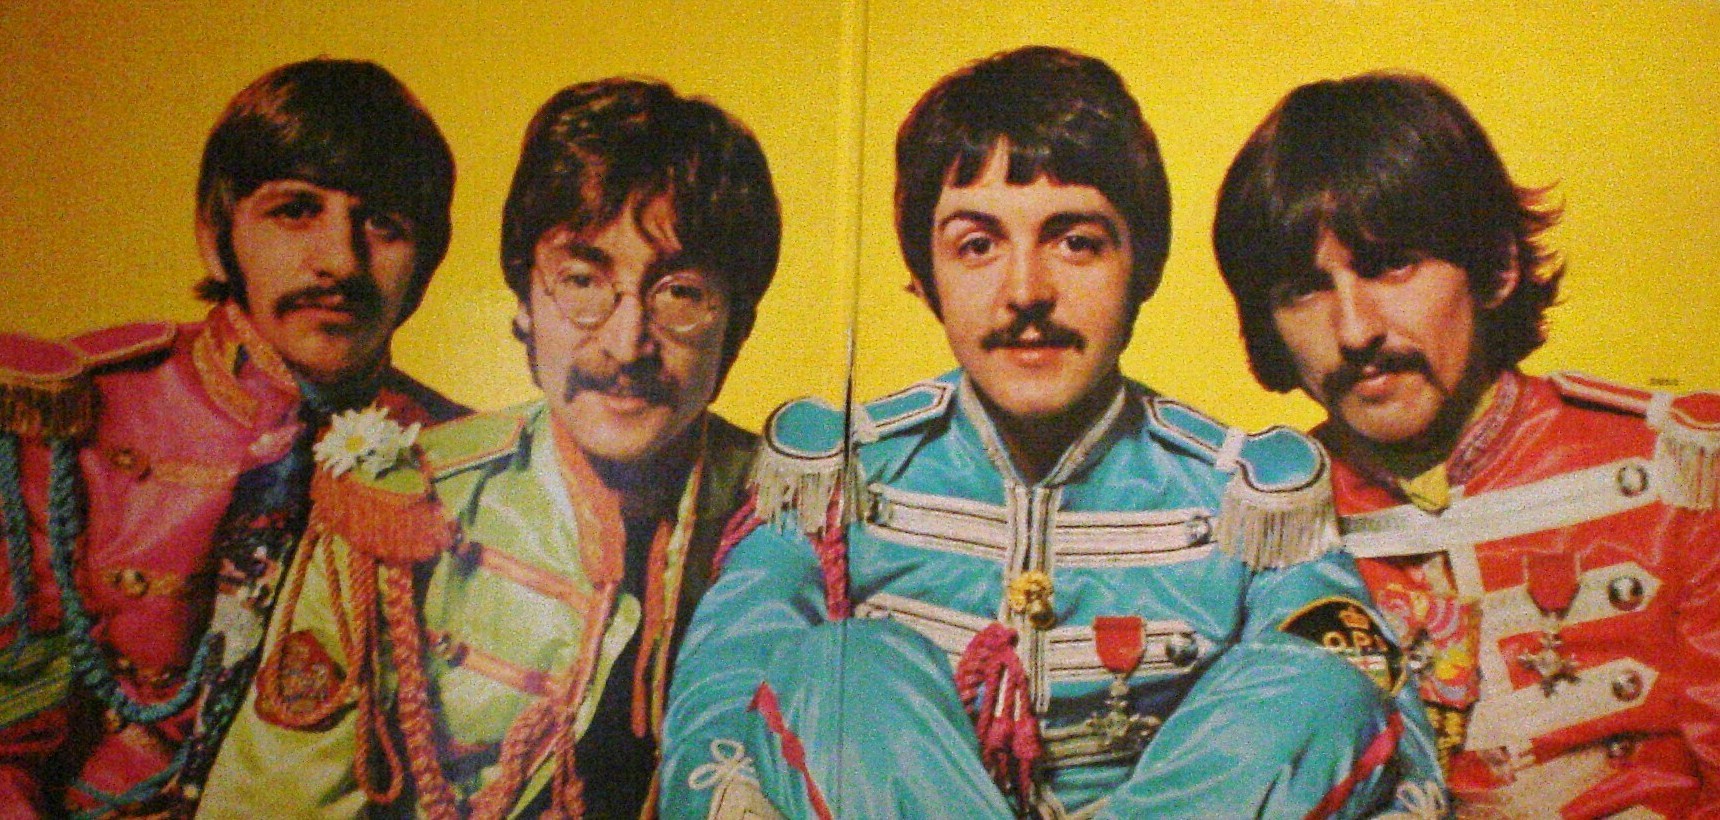 Beatles sgt peppers lonely hearts club. Битлз сержант Пеппер. Sgt Pepper s Lonely Hearts Club Band. Sgt. Pepper's Lonely Hearts Club Band Битлз. Sgt Pepper 1967.